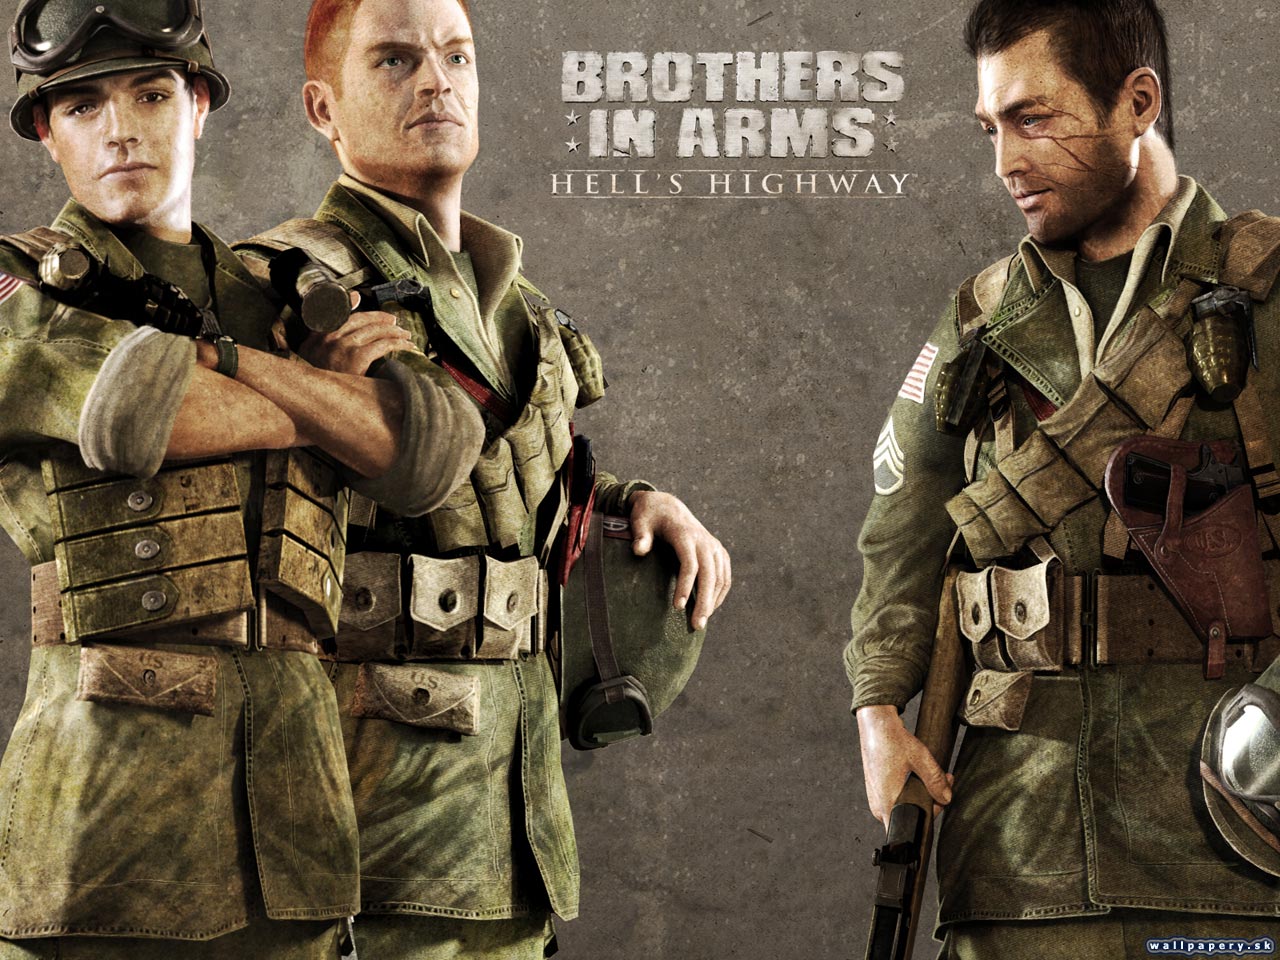 Brothers in Arms: Hell's Highway - wallpaper 11